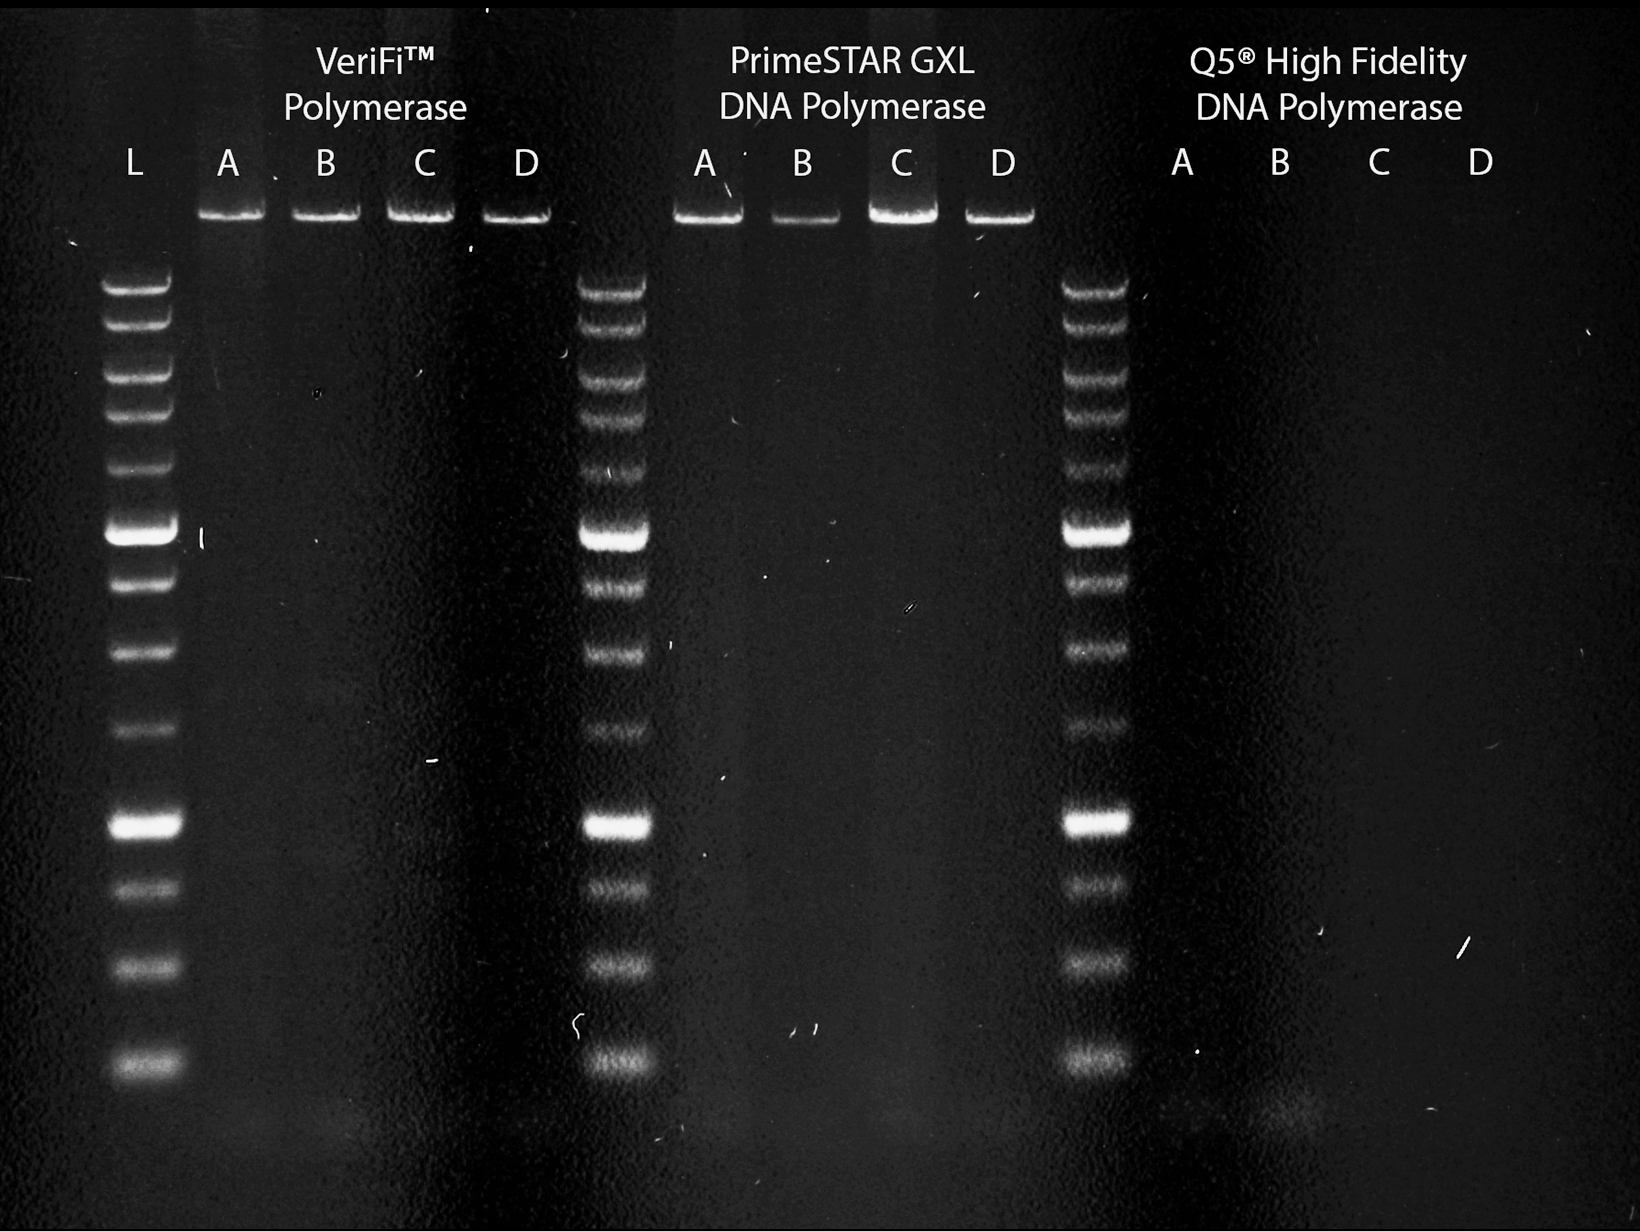 A gel image showing VeriFi™ Polymerase and Takara PrimeSTAR GXL DNA Polymerase successfully amplifying a 17.5 kb DNA fragment. Q5 was unable to amplify the same fragment.